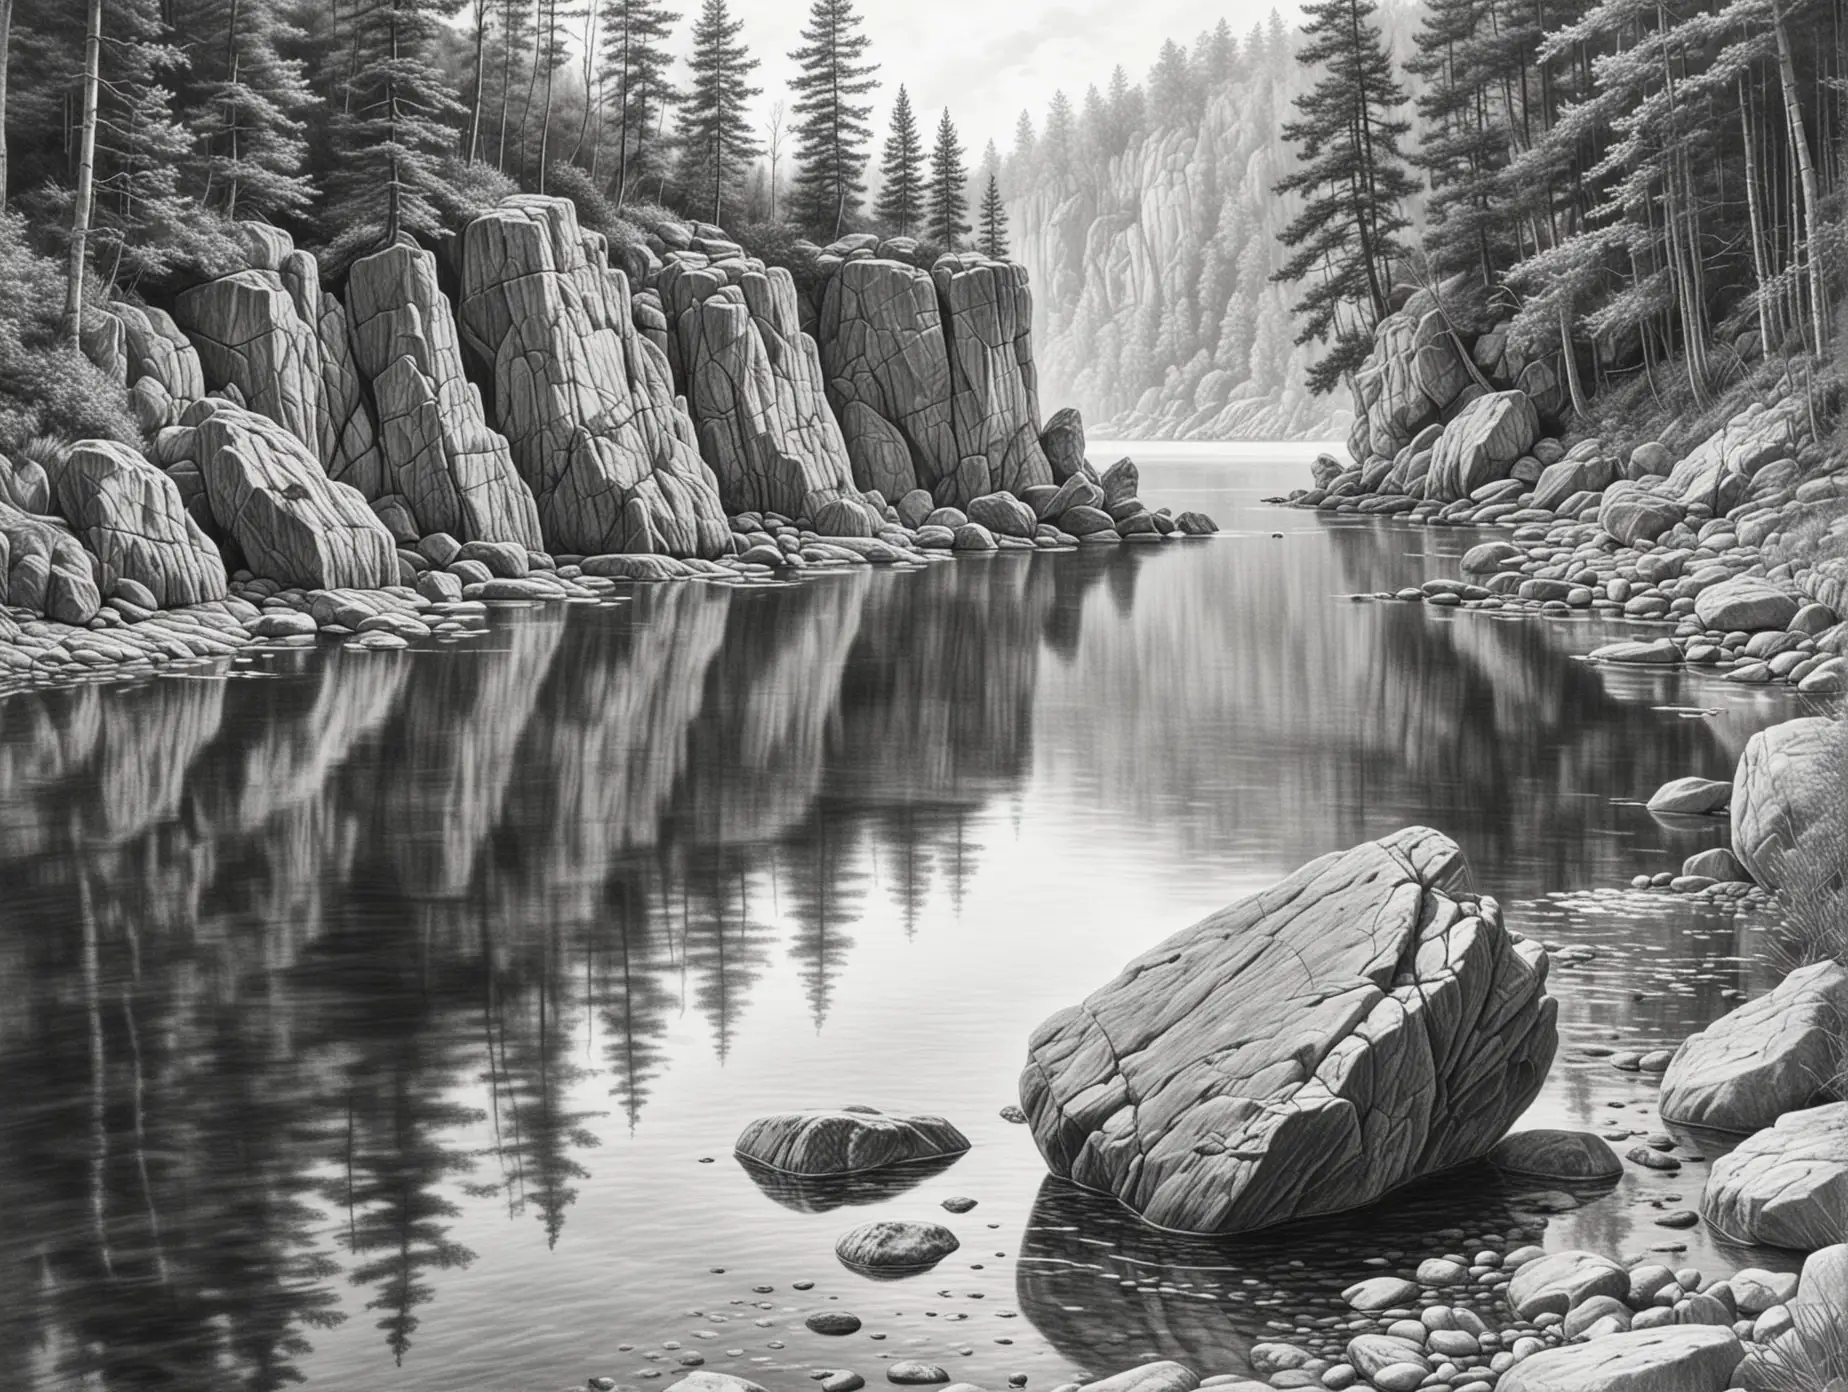 Realistic-Pencil-Sketch-of-Rocks-by-a-Lakeshore